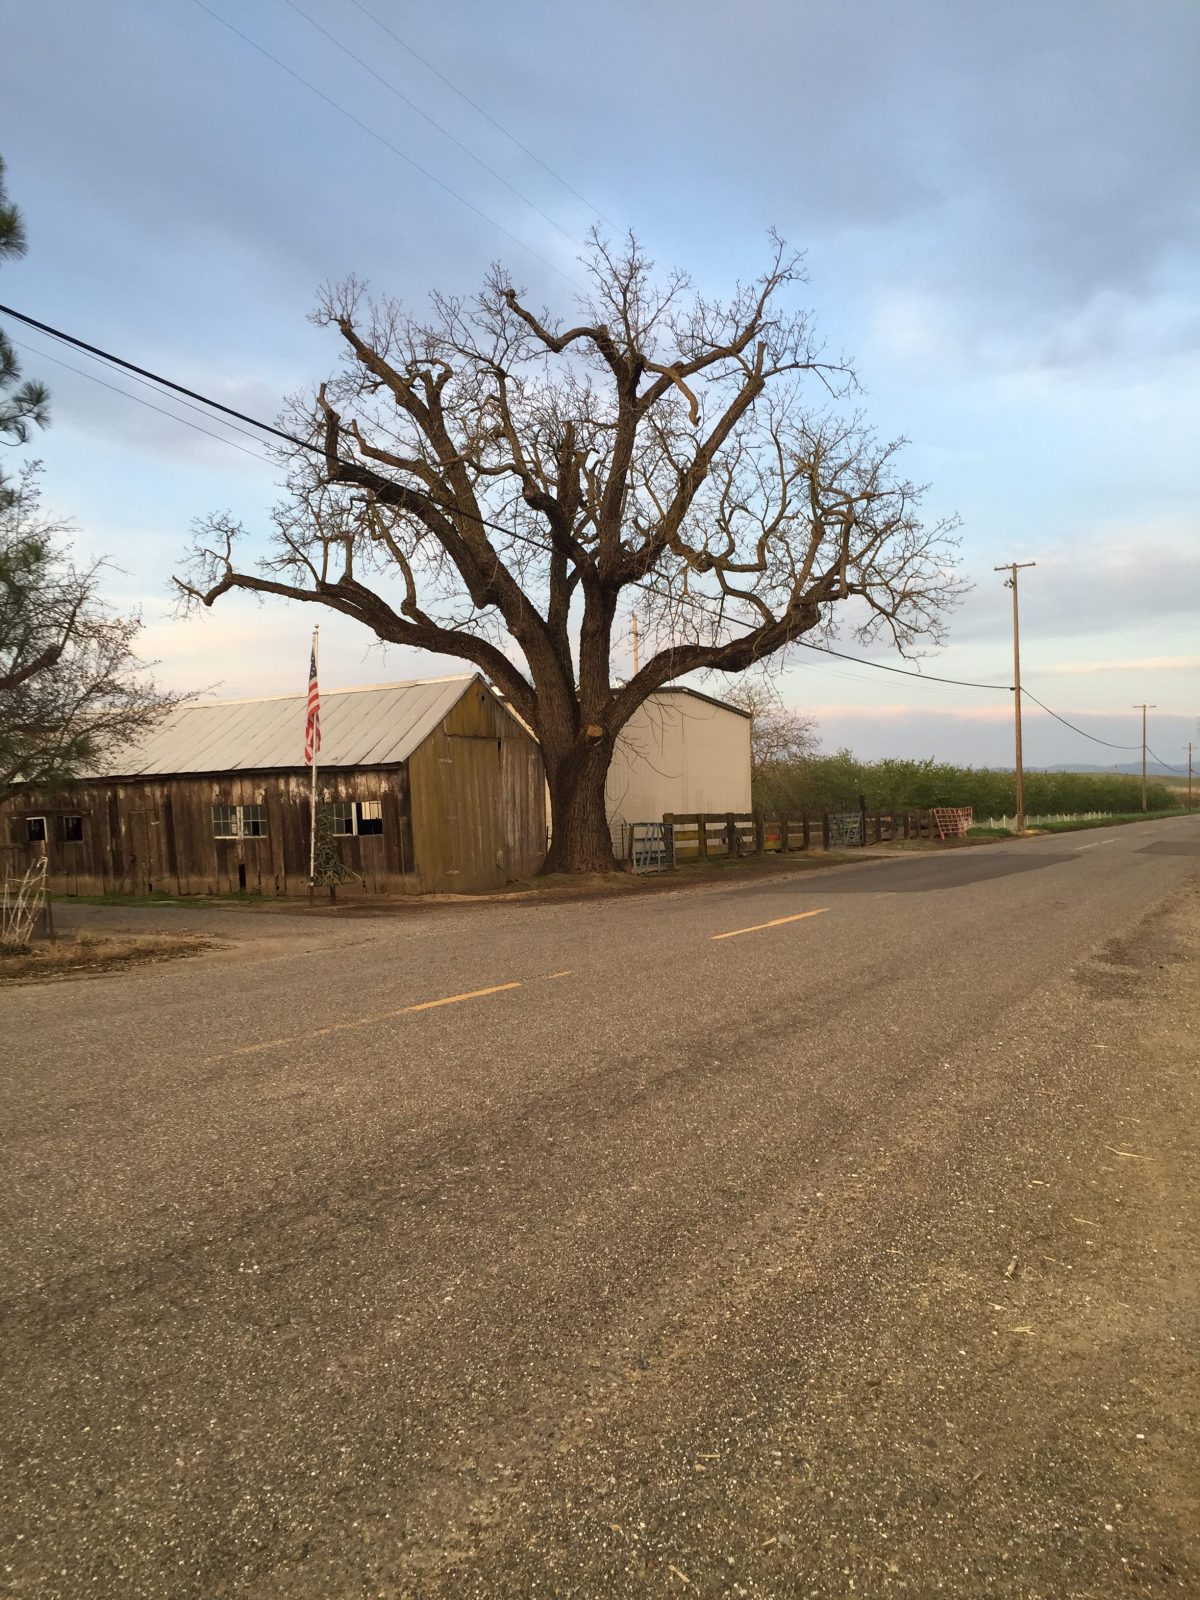 Salvaging Large Claro Walnut Trees from an Old Homestead